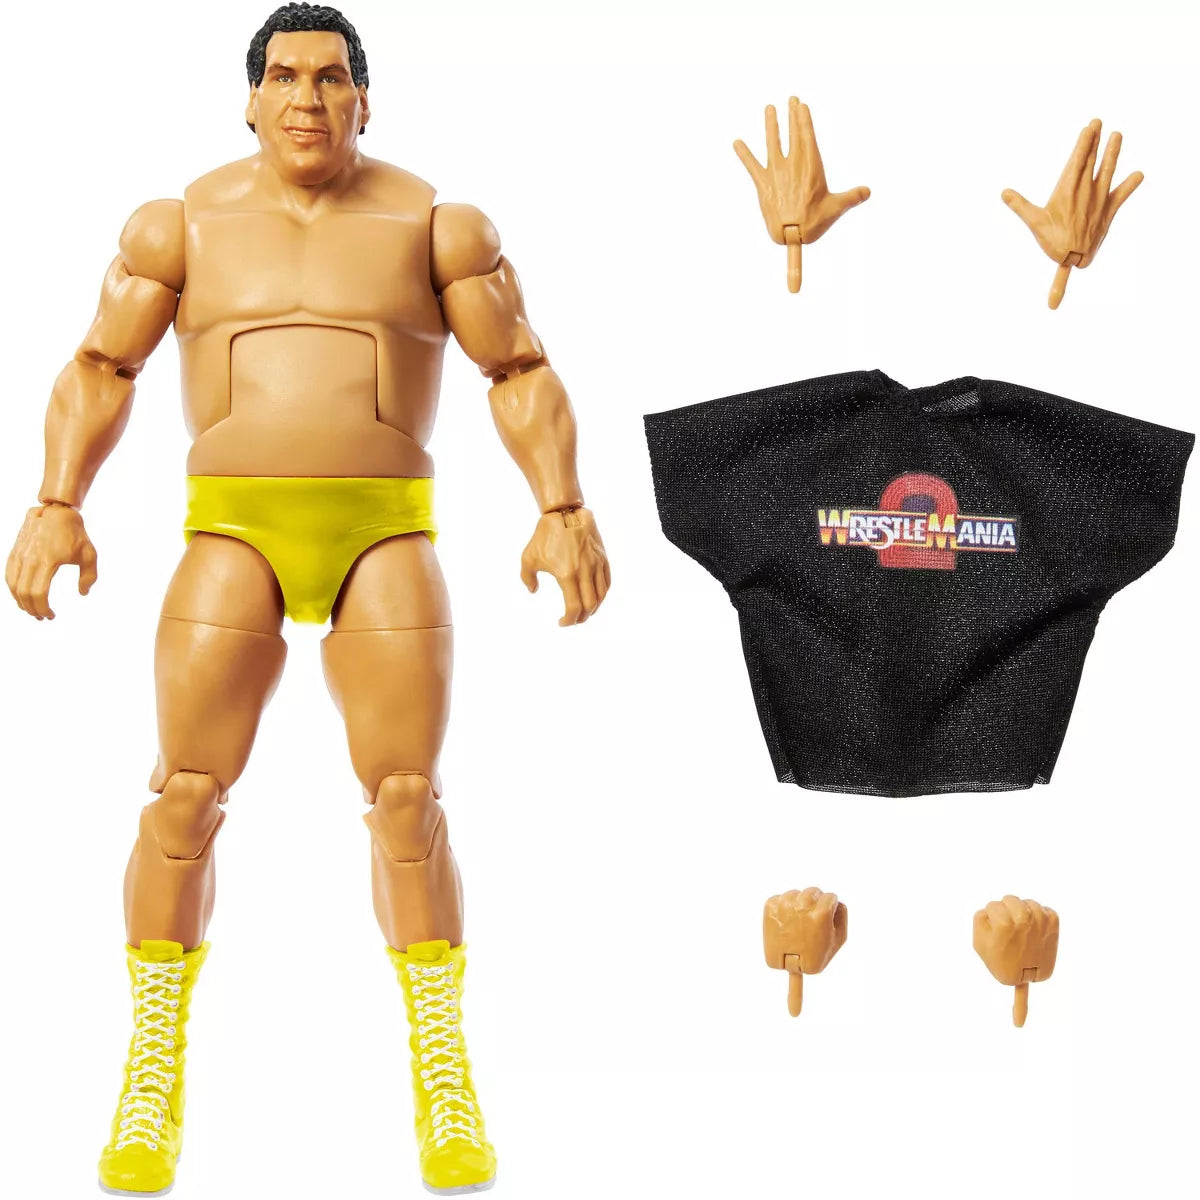 WWE Elite Collection Series- WWF Legends- Andre the Giant